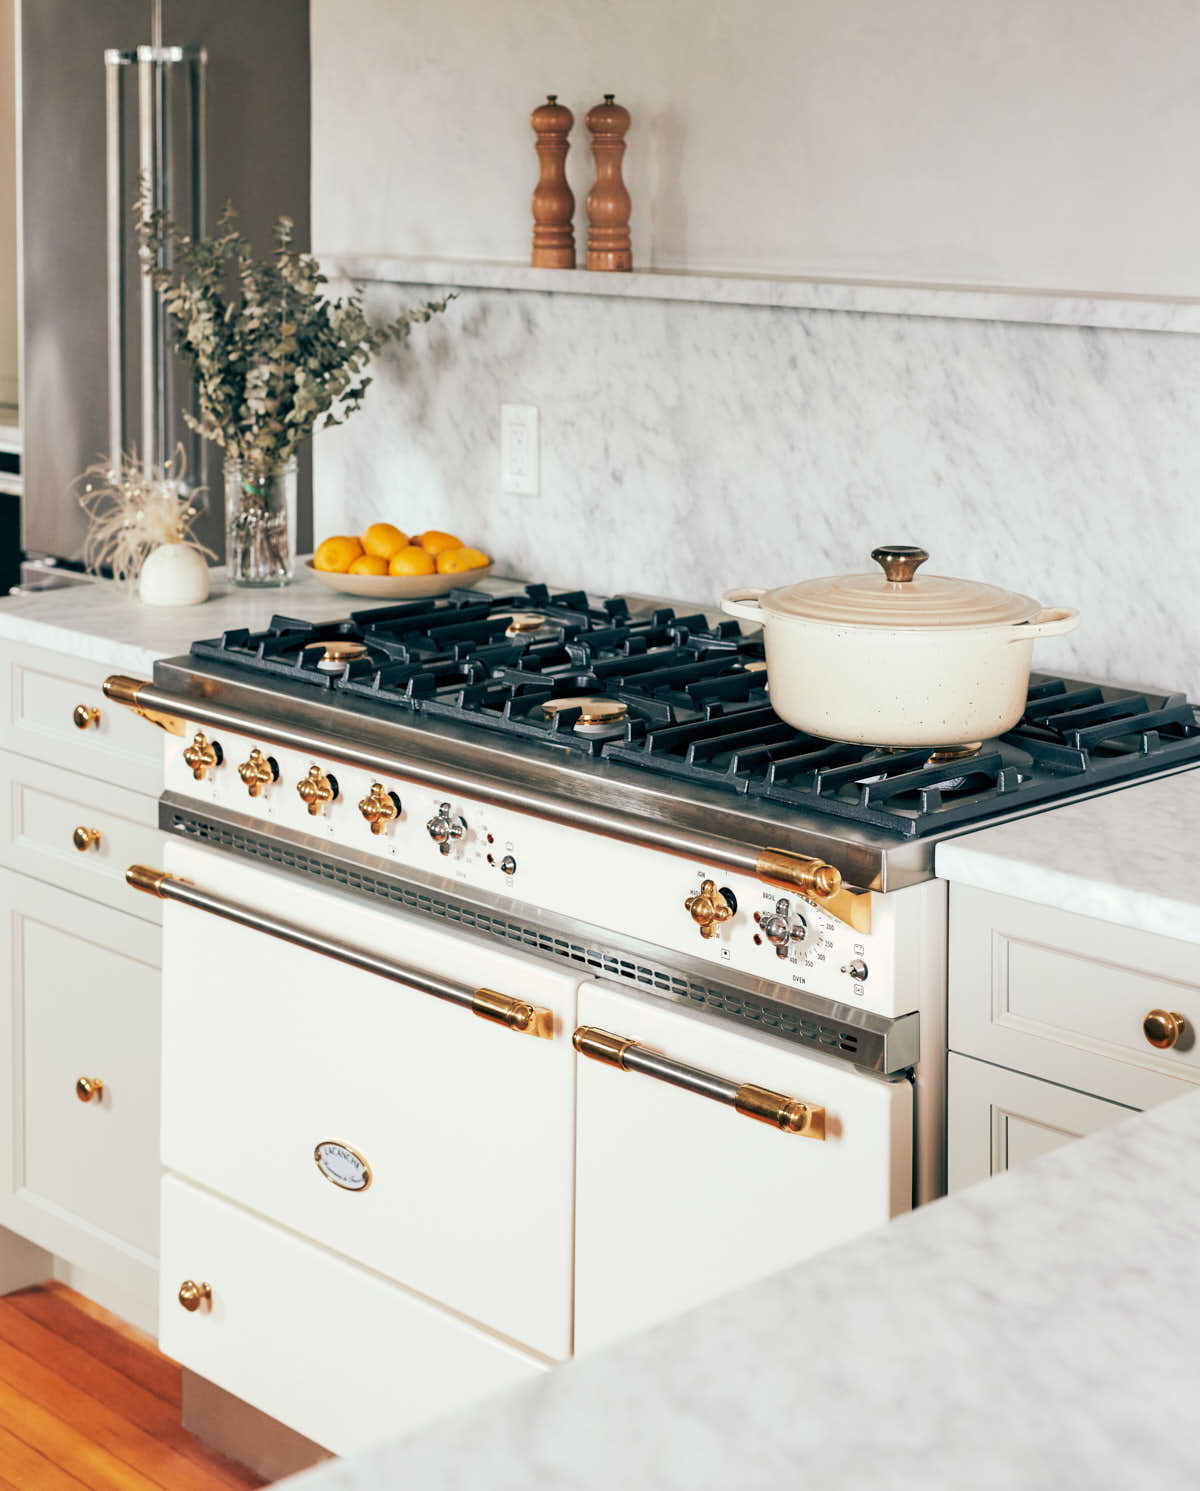 White Lacanche stove in a kitchen with marble counters.